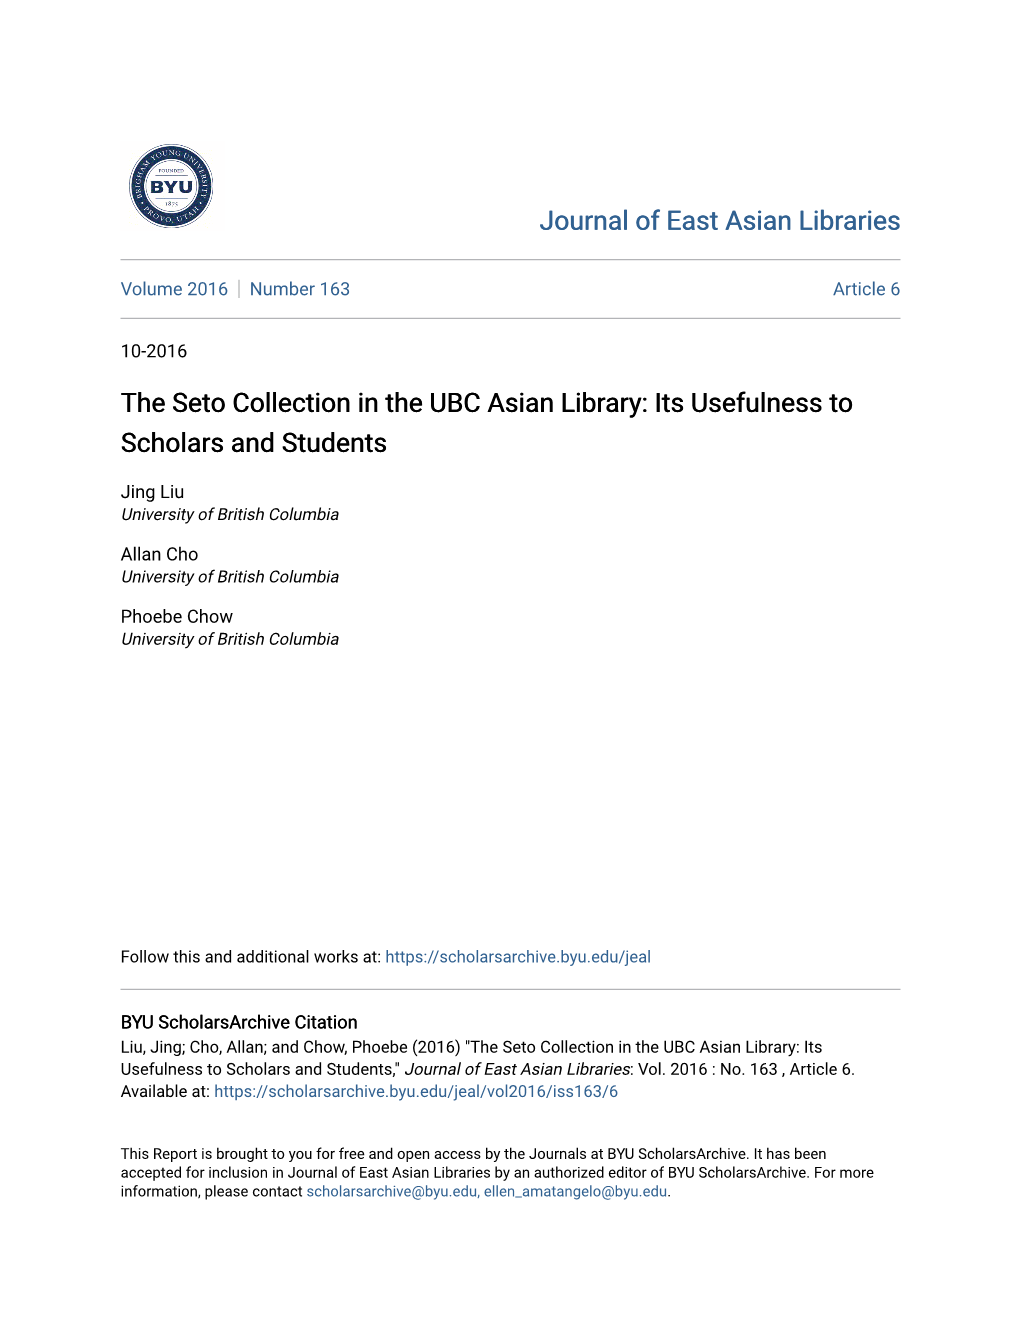 The Seto Collection in the UBC Asian Library: Its Usefulness to Scholars and Students